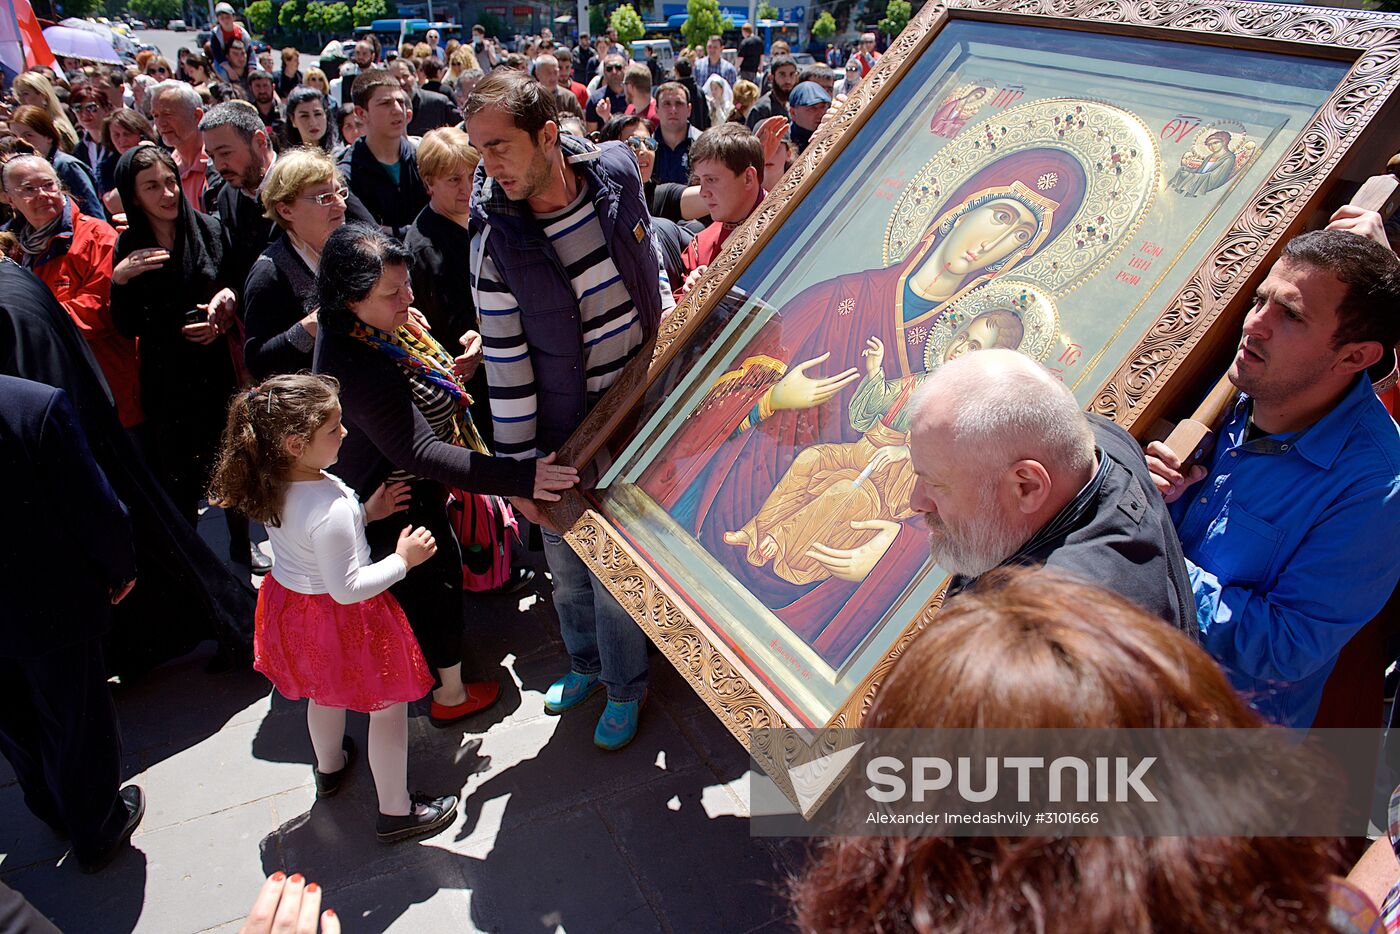 Tbilisi marks Sanctity of Family Day